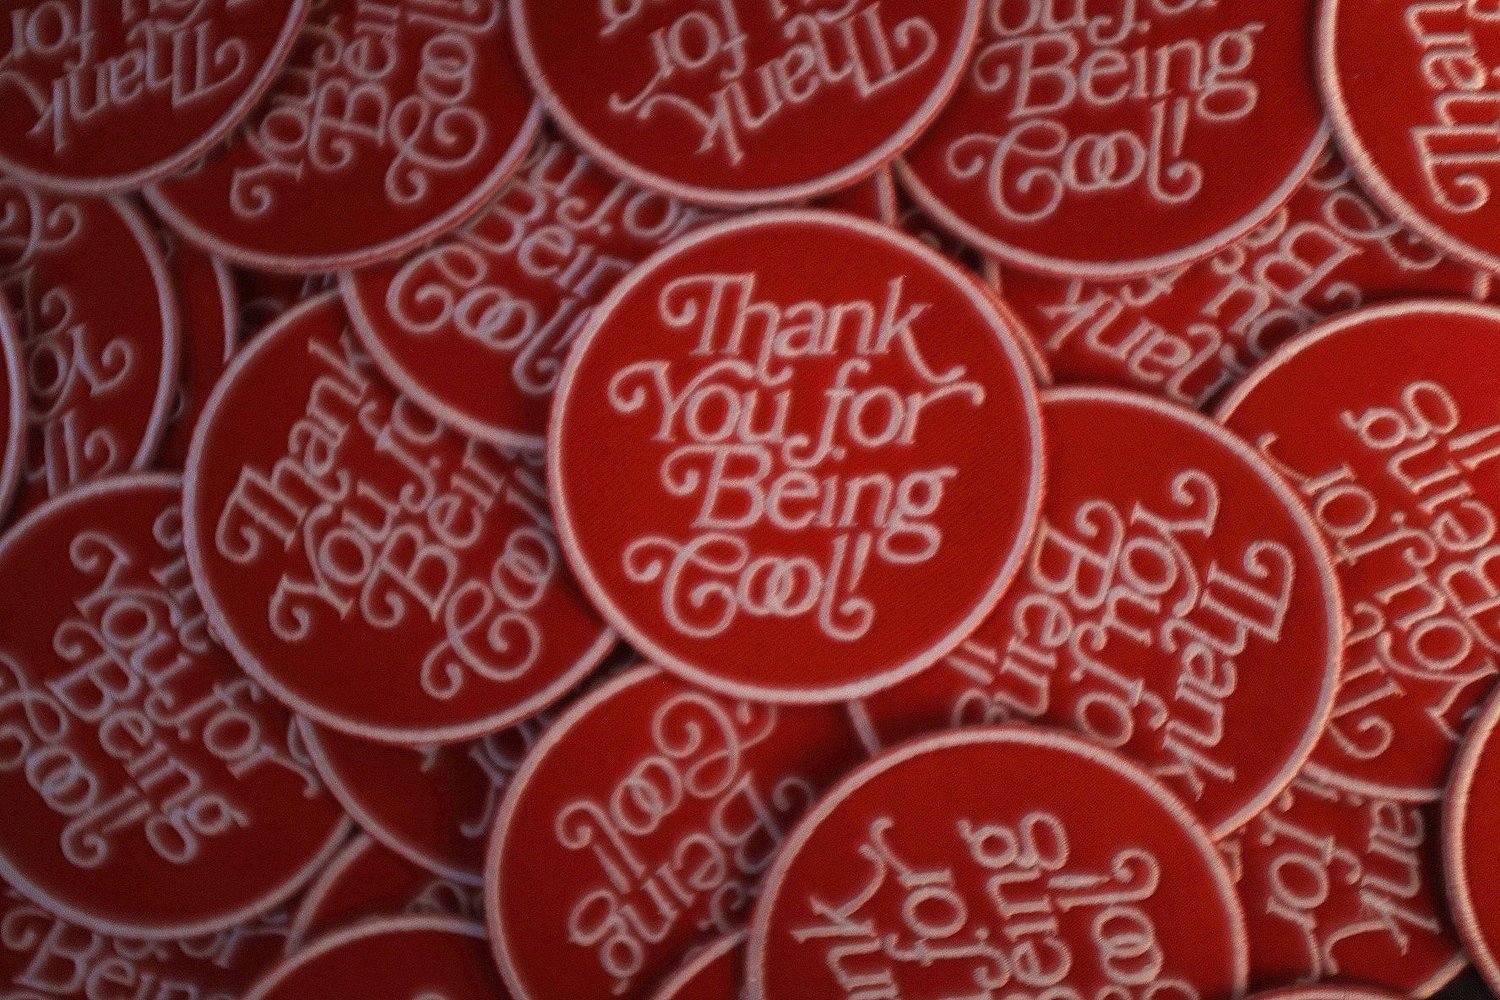 Image of Thank You for Being Cool! Patch (2.5-inch)